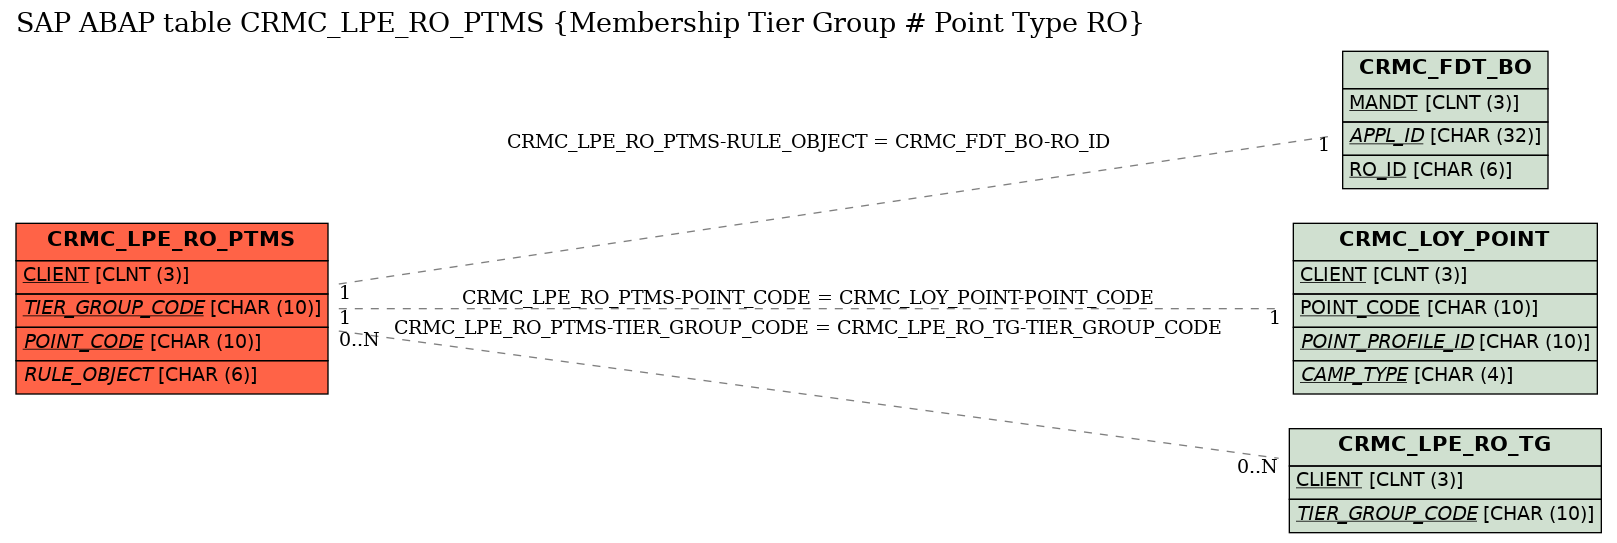 E-R Diagram for table CRMC_LPE_RO_PTMS (Membership Tier Group # Point Type RO)